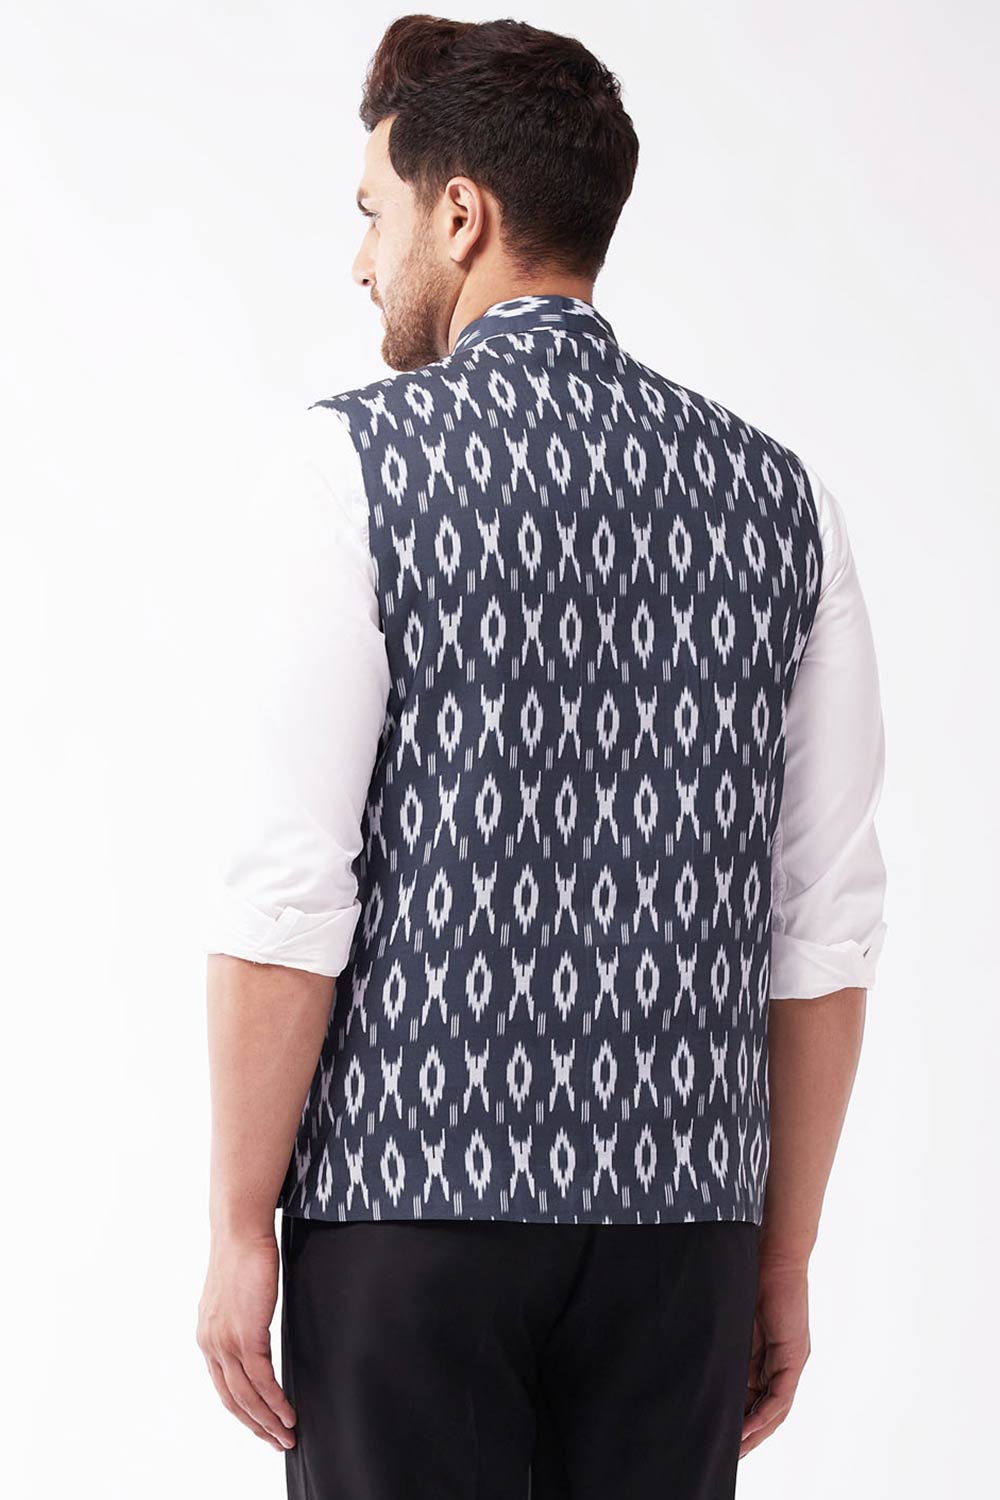 Black Printed Nehru Jacket Online Shopping for Women at Low Prices